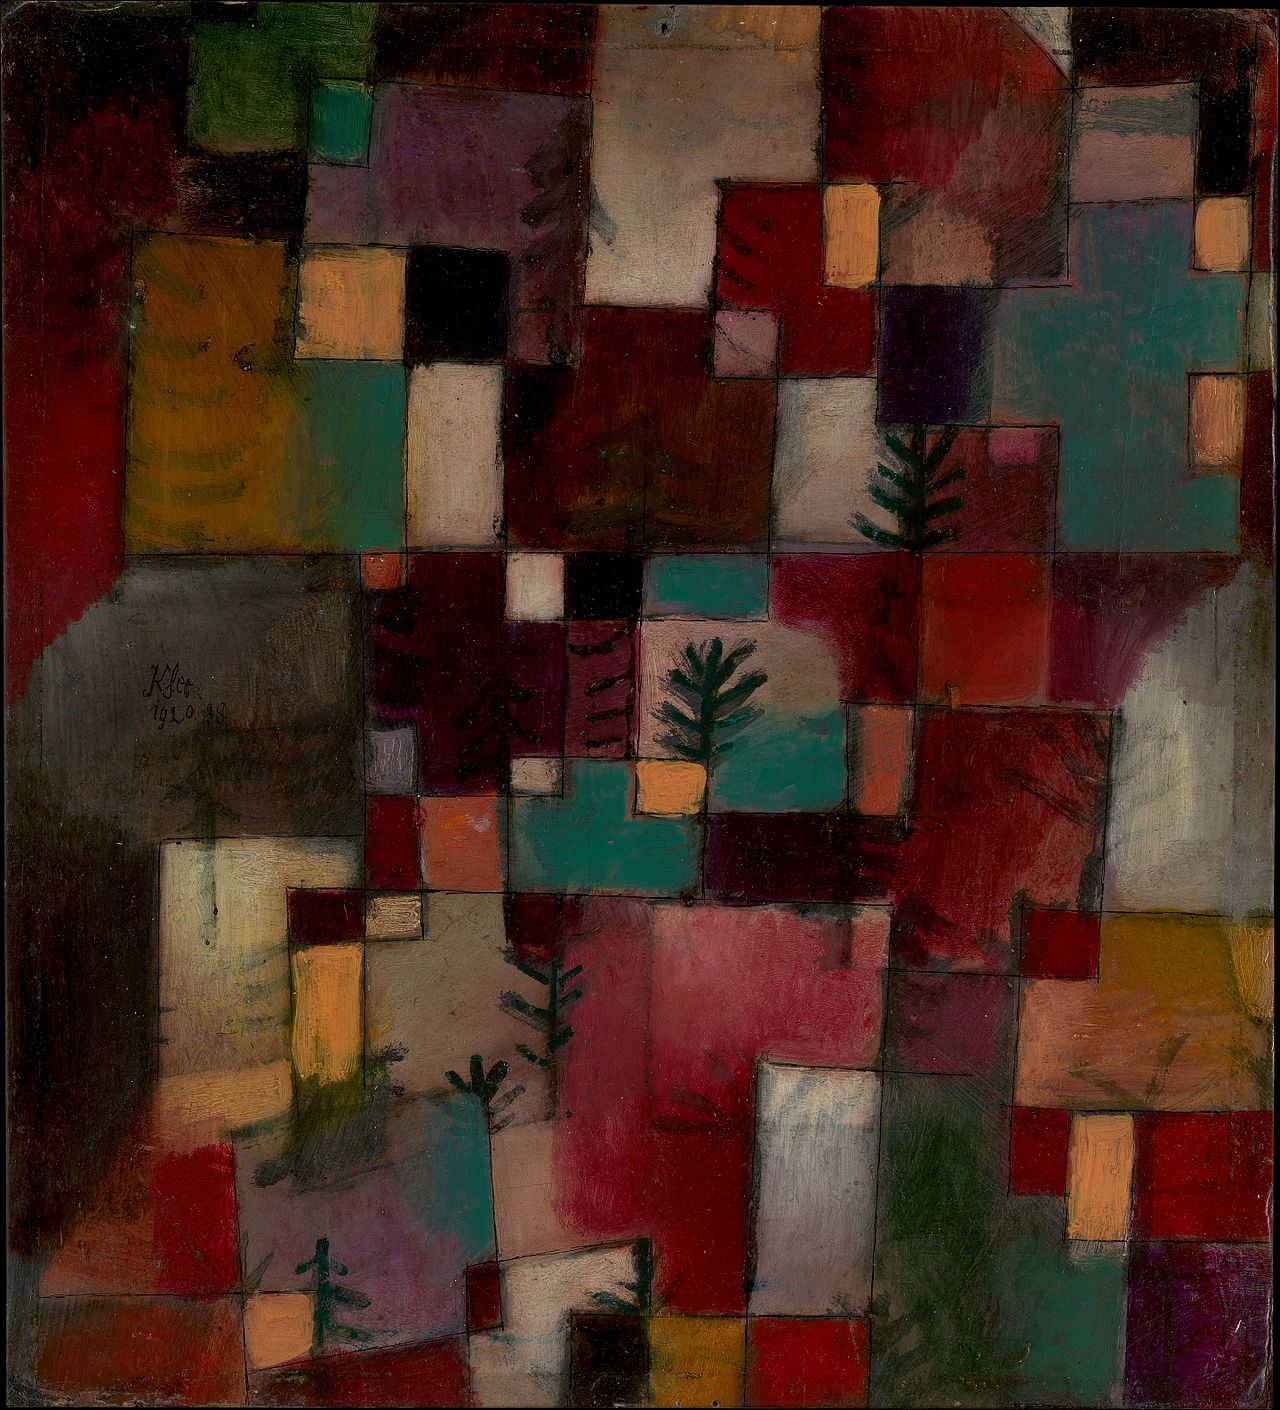 Redgreen and Violet-Yellow Rhythms Paul Klee